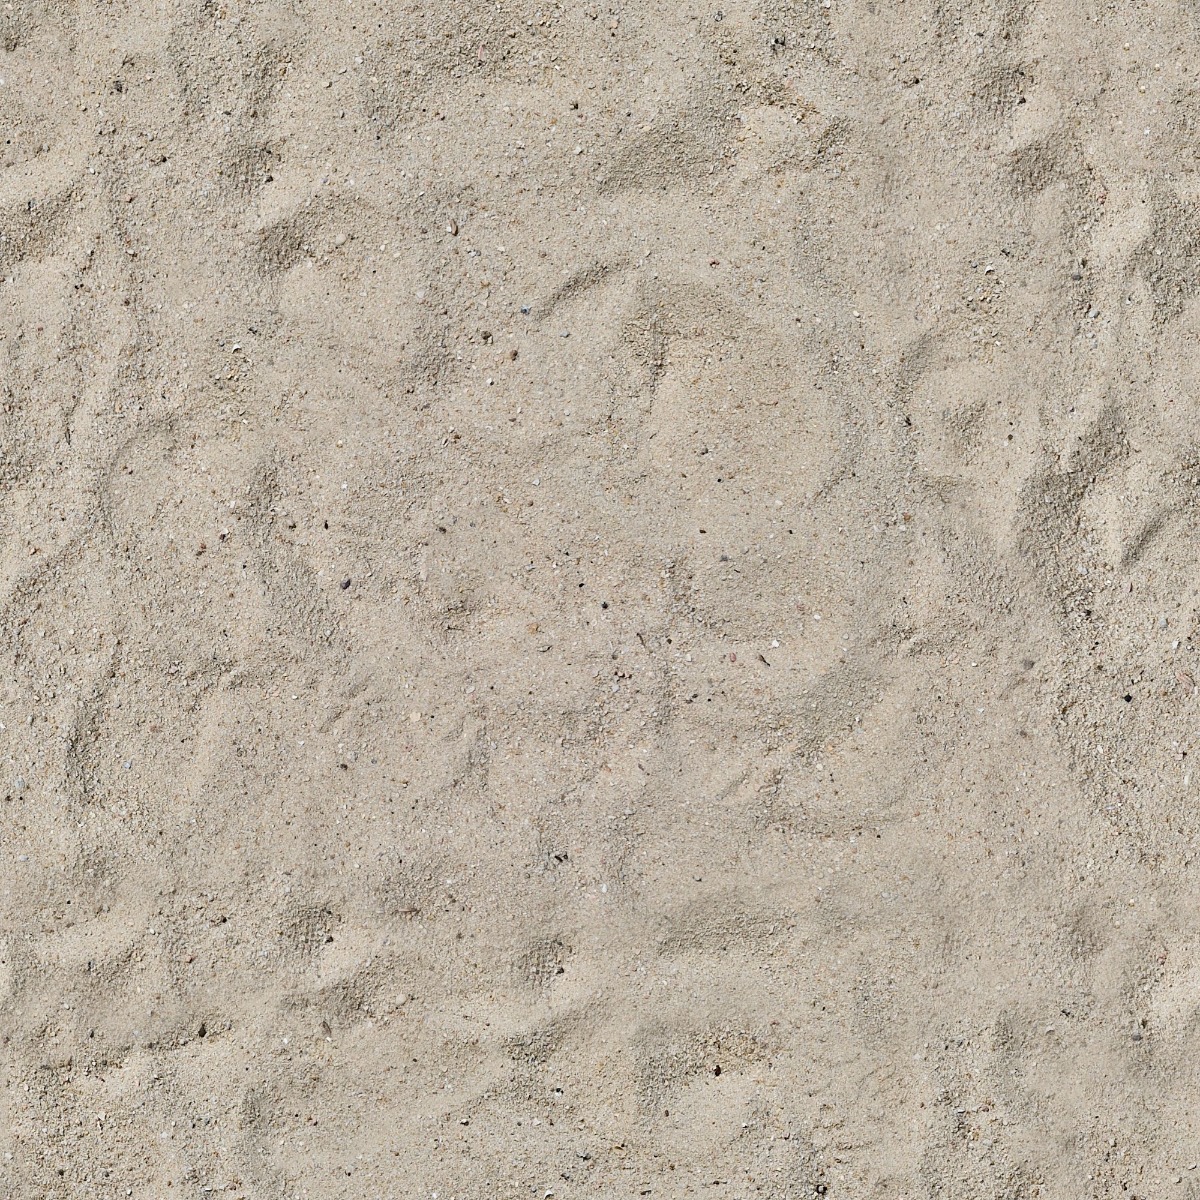 A seamless organic texture with sand units arranged in a None pattern